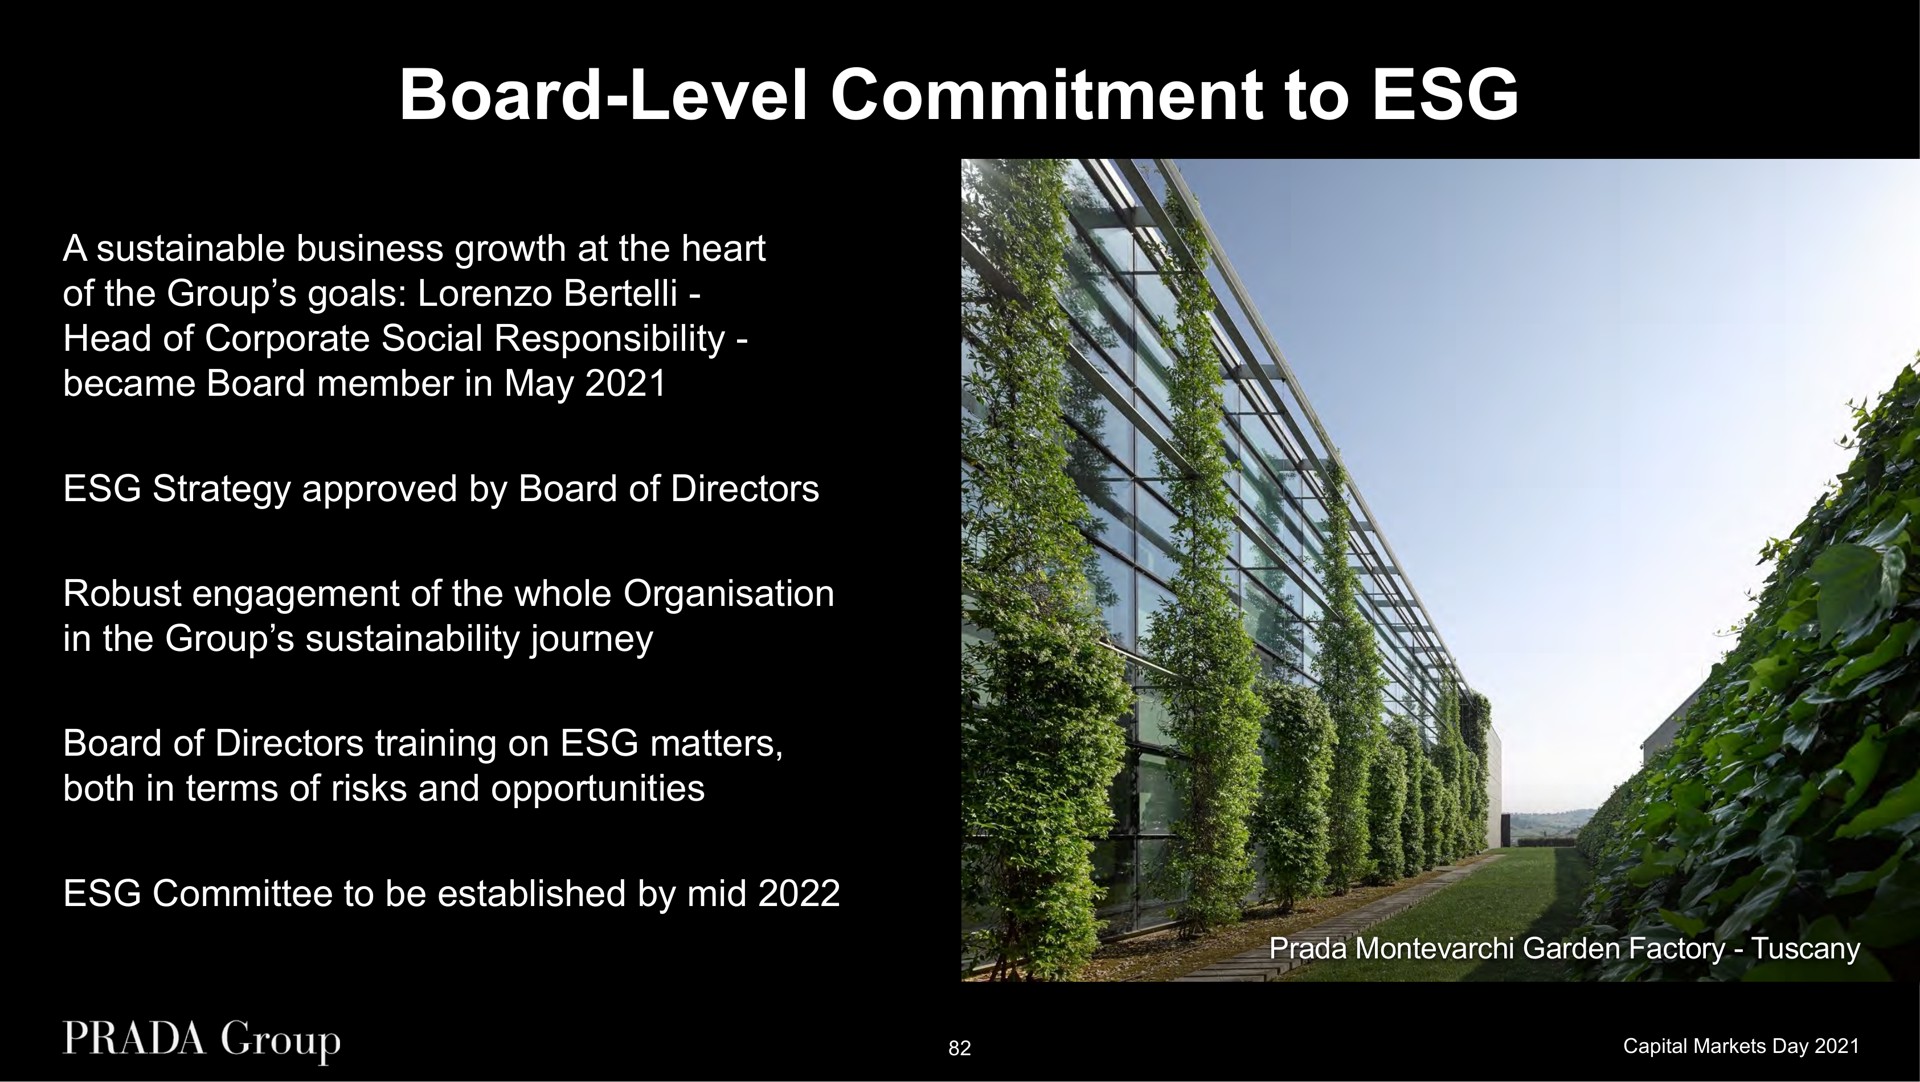 board level commitment to a sustainable business growth at the heart of the group goals head of corporate social responsibility became board member in may strategy approved by board of directors robust engagement of the whole in the group journey board of directors training on matters both in terms of risks and opportunities committee to be established by mid garden factory | Prada